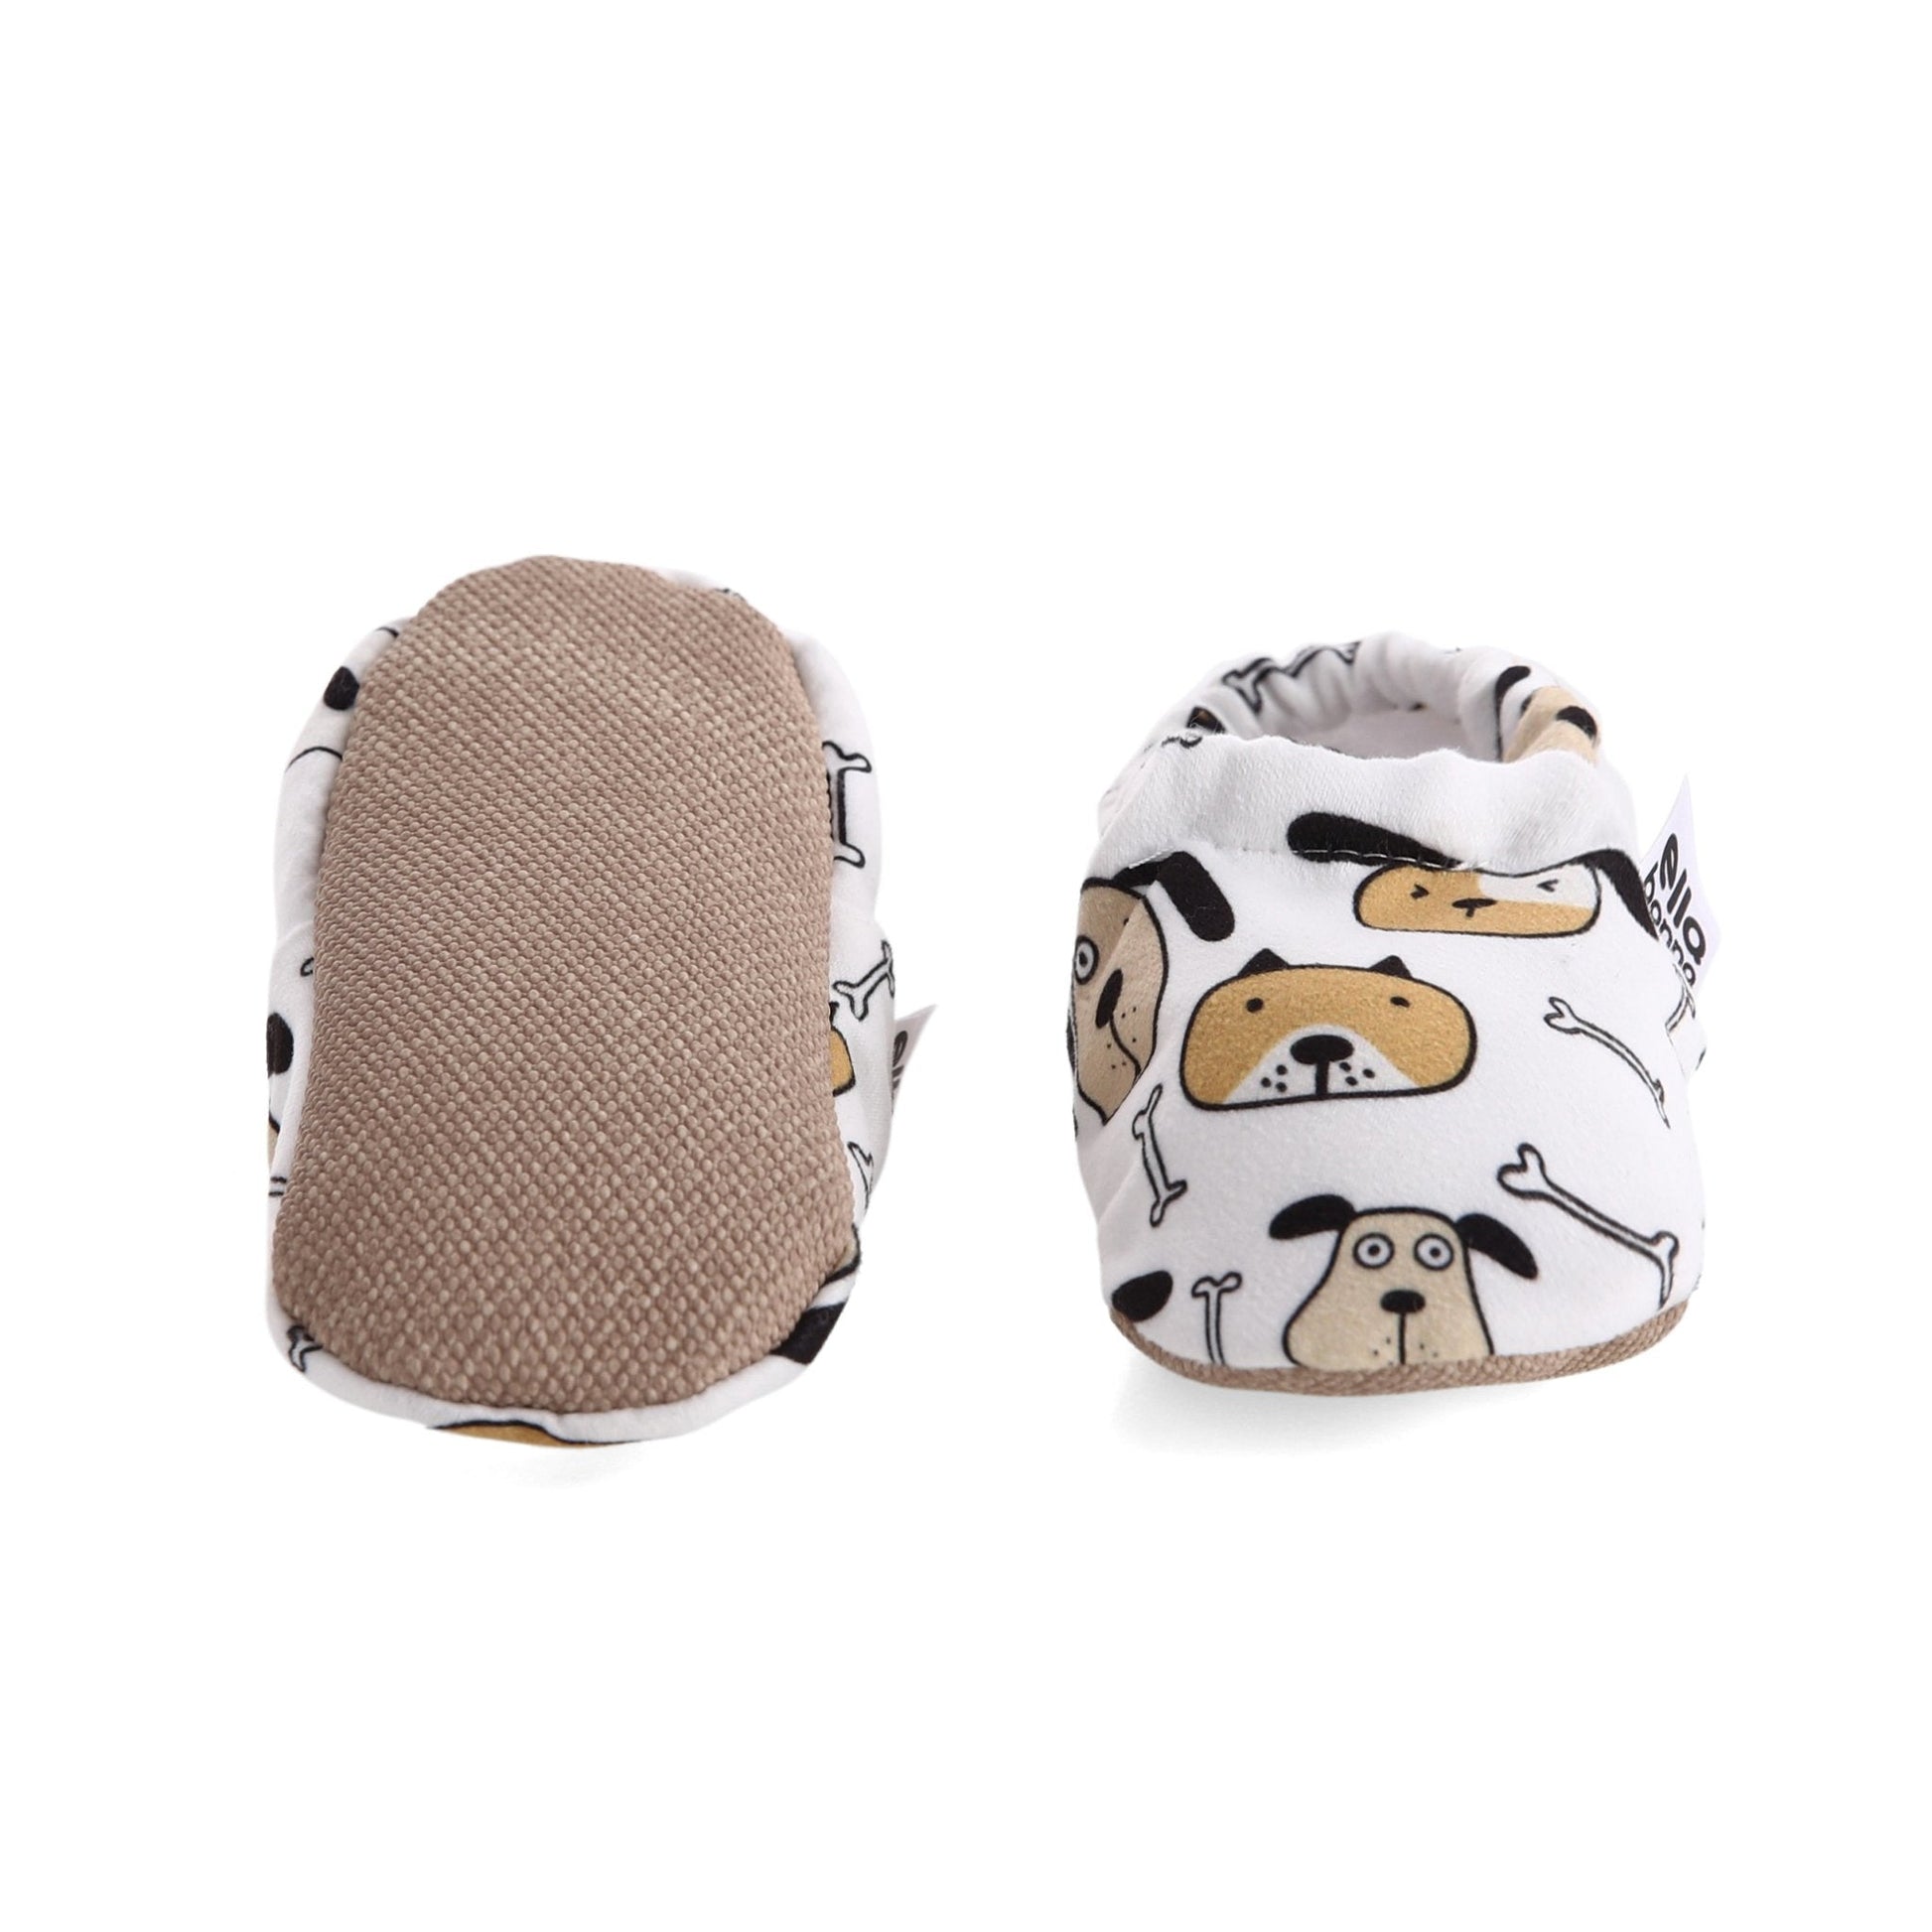 Dog Patterned Baby Booties